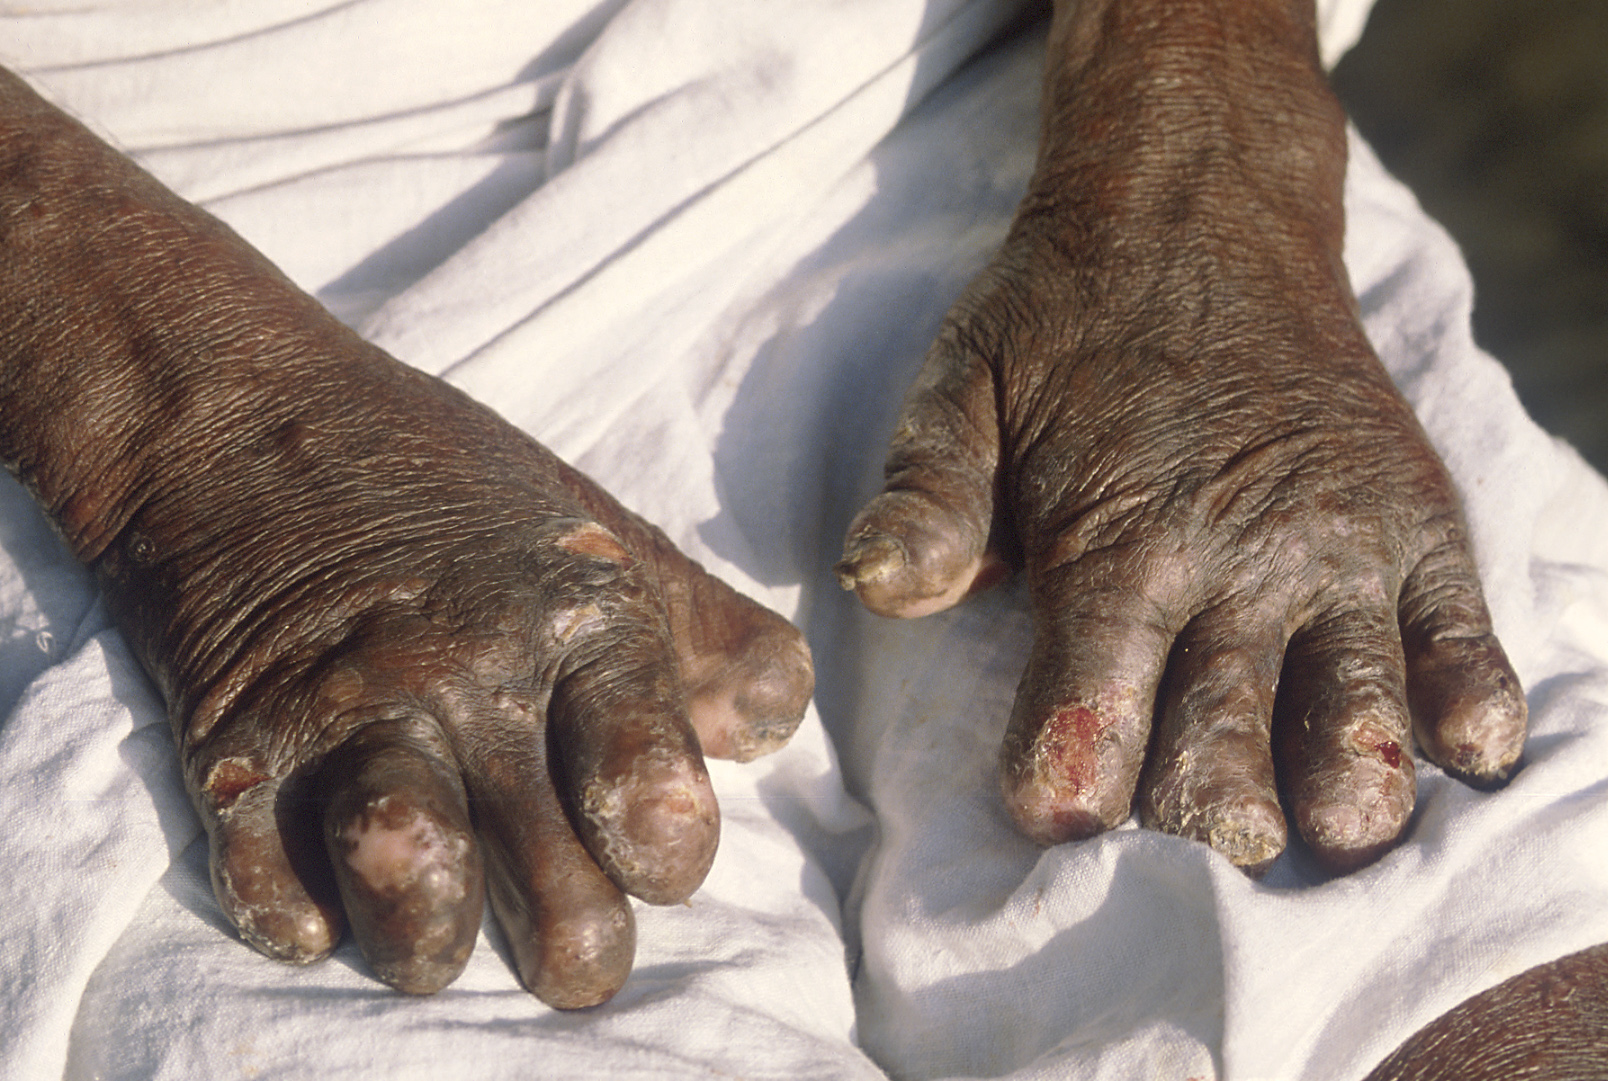 Leprosy-inflicted deformities on the hands. (Source: Wikimedia Commons)